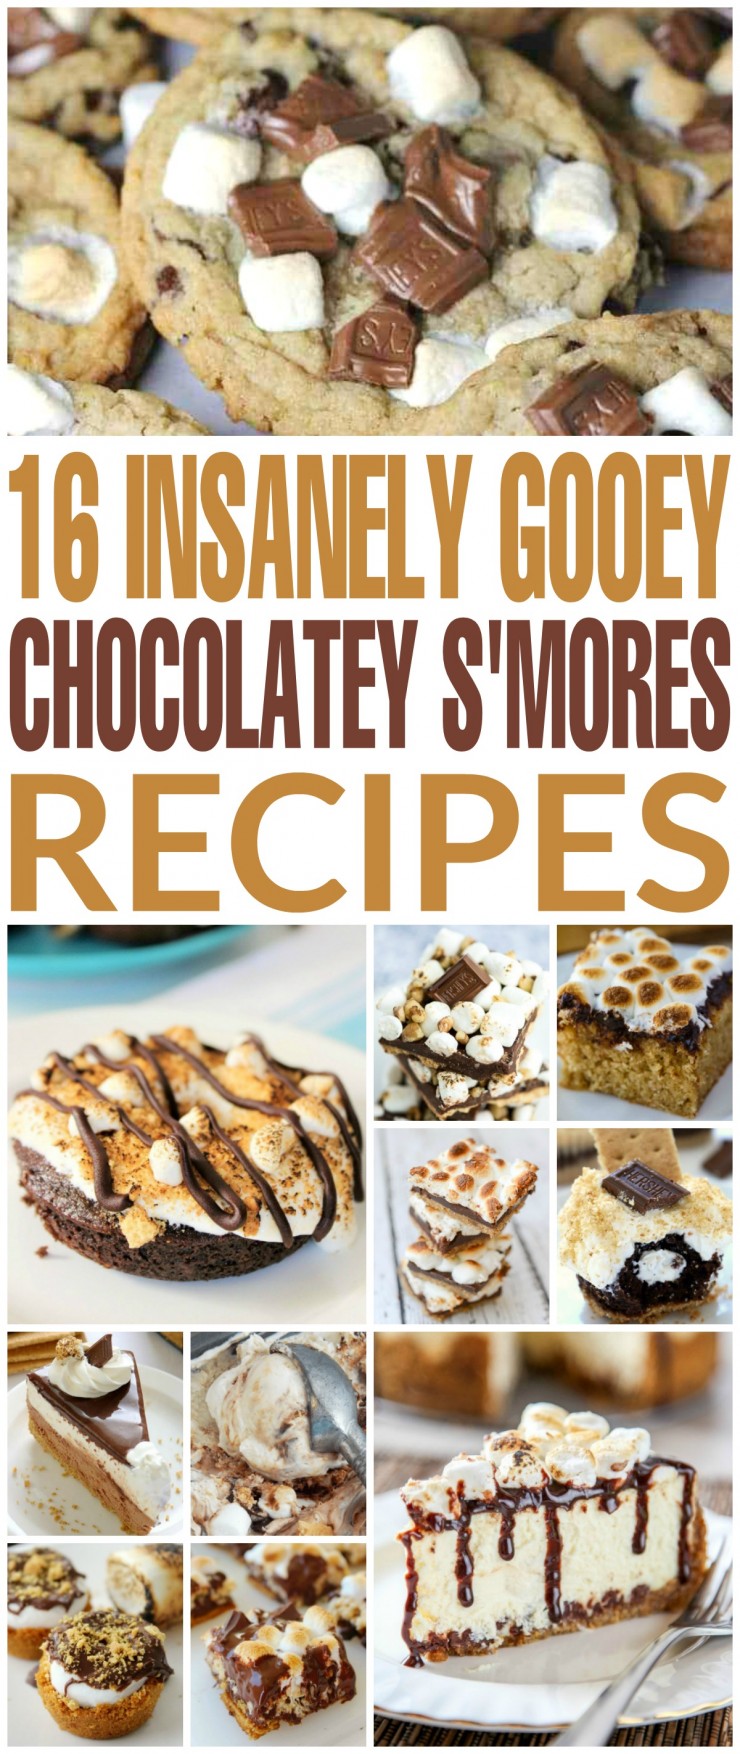 Try one or more of these 16 Insanely Gooey, Chocolatey S'mores Recipes. Inspired by S'mores, these decadent recipes are sure to be a hit!